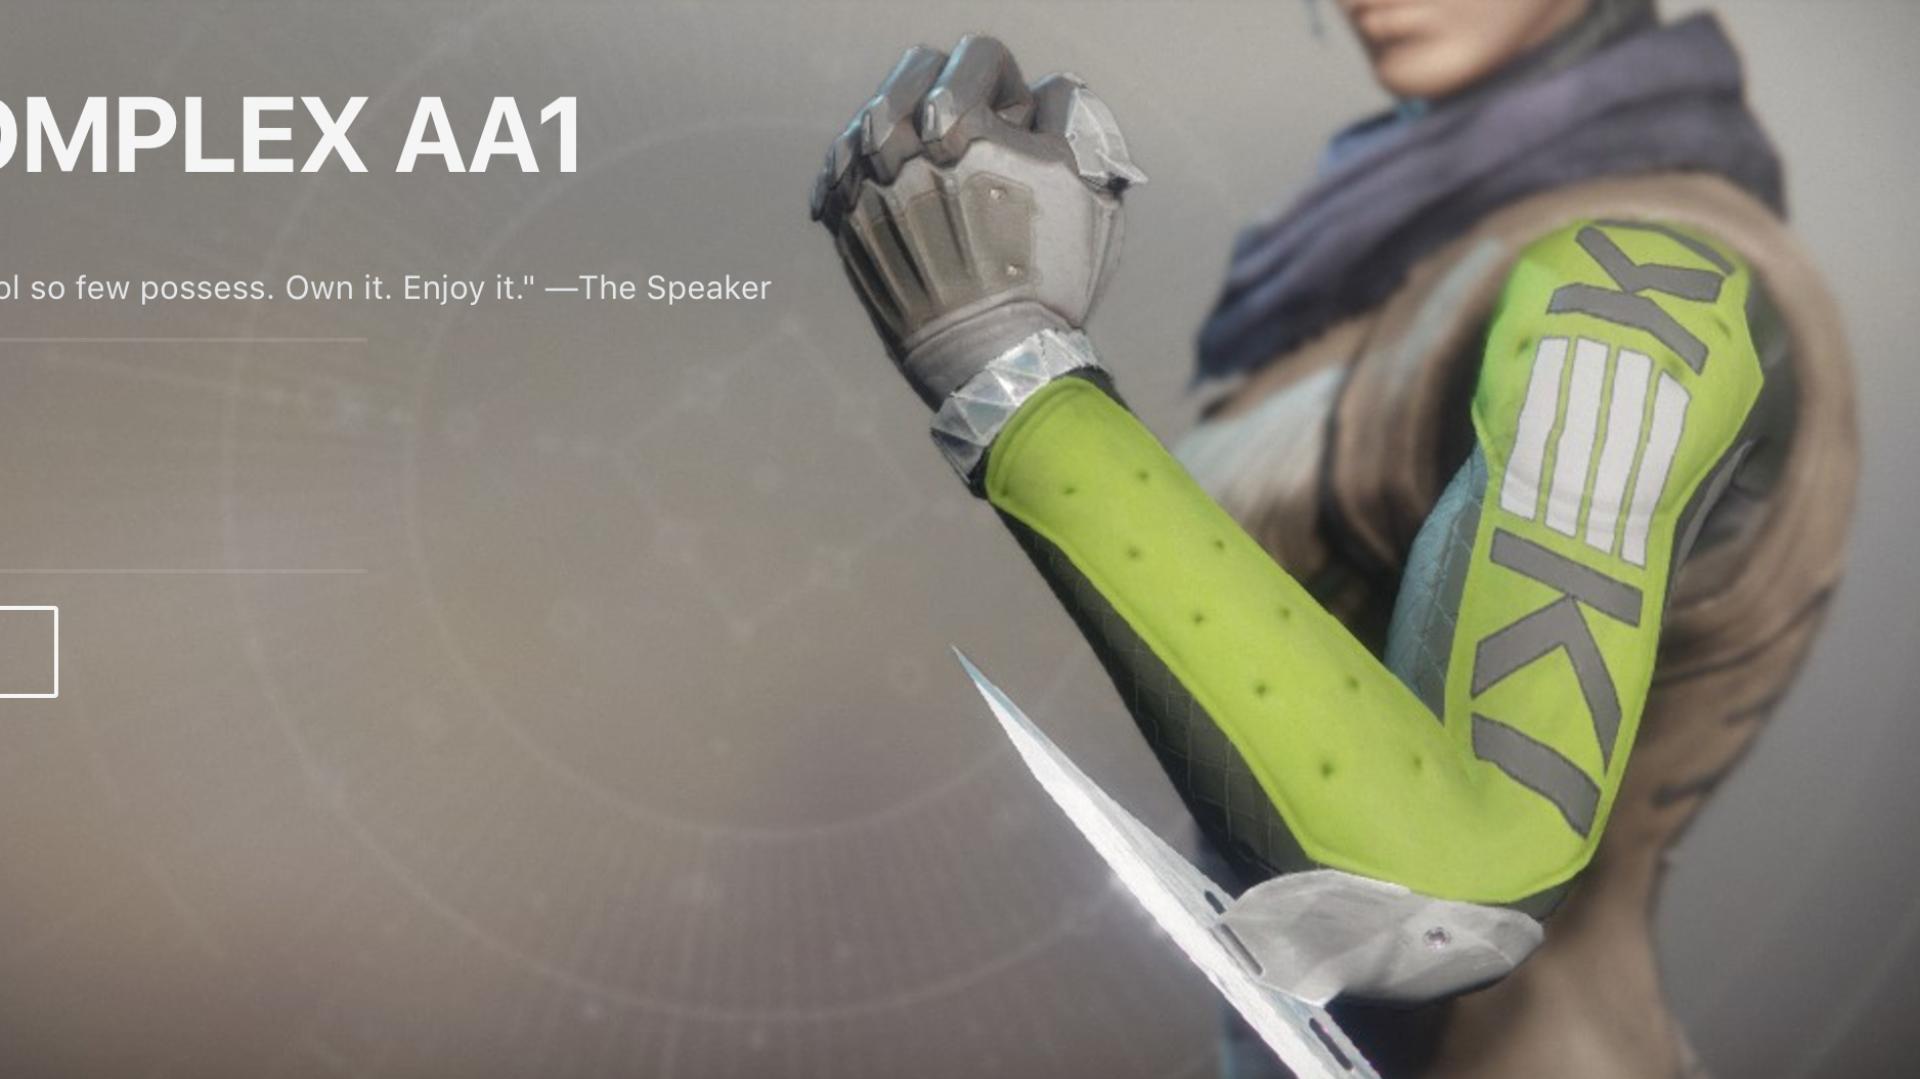 Destiny 2 Has Armor Emblazoned With “KEK” Logo, Prompts Outrage